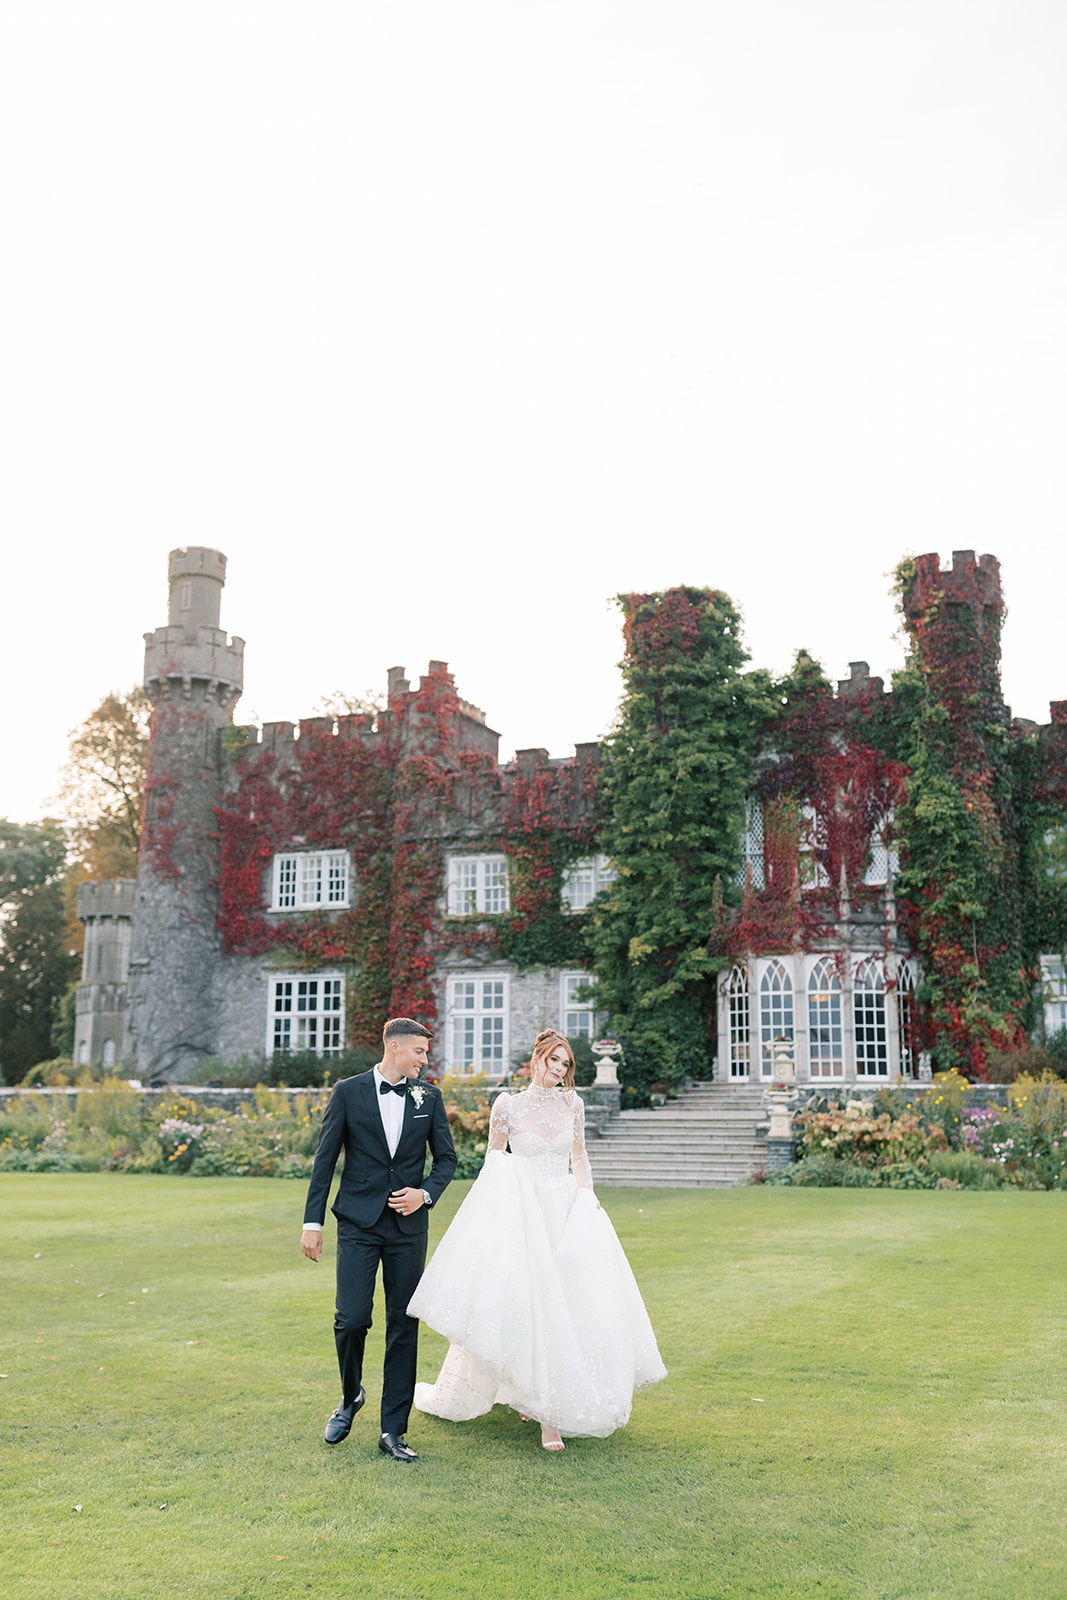 couple's wedding portraits on the grounds of luttrellstown castle in dublin ireland